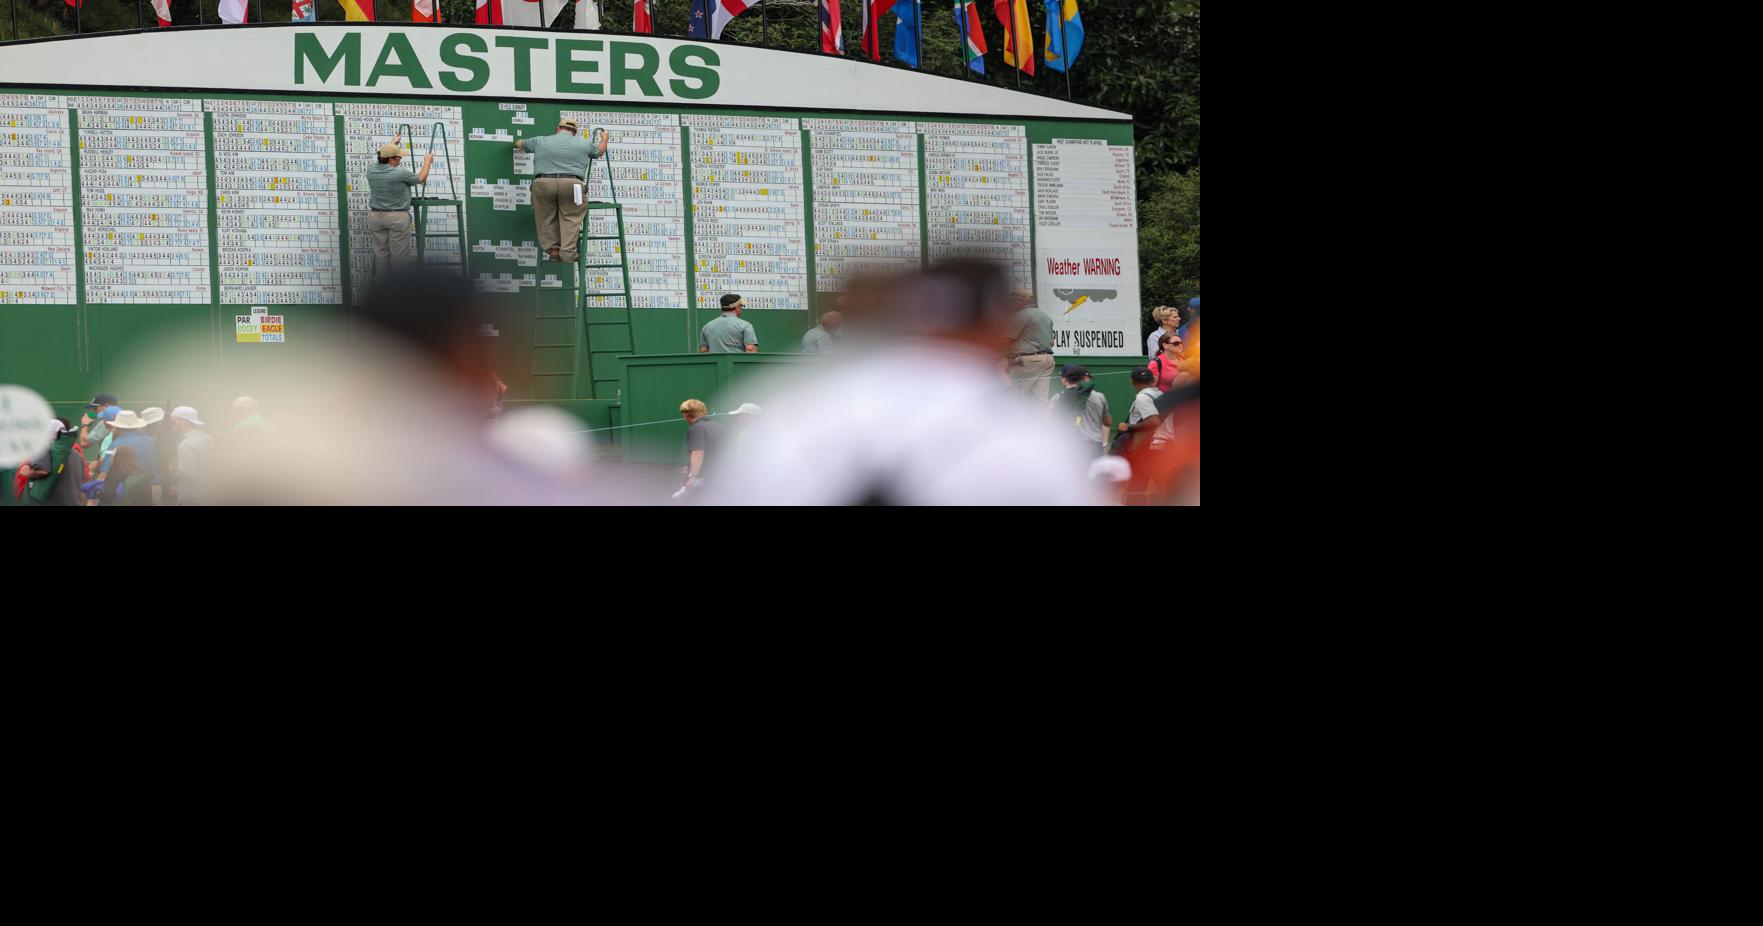 Masters 2023 leaderboard: Second round suspended Friday due to weather